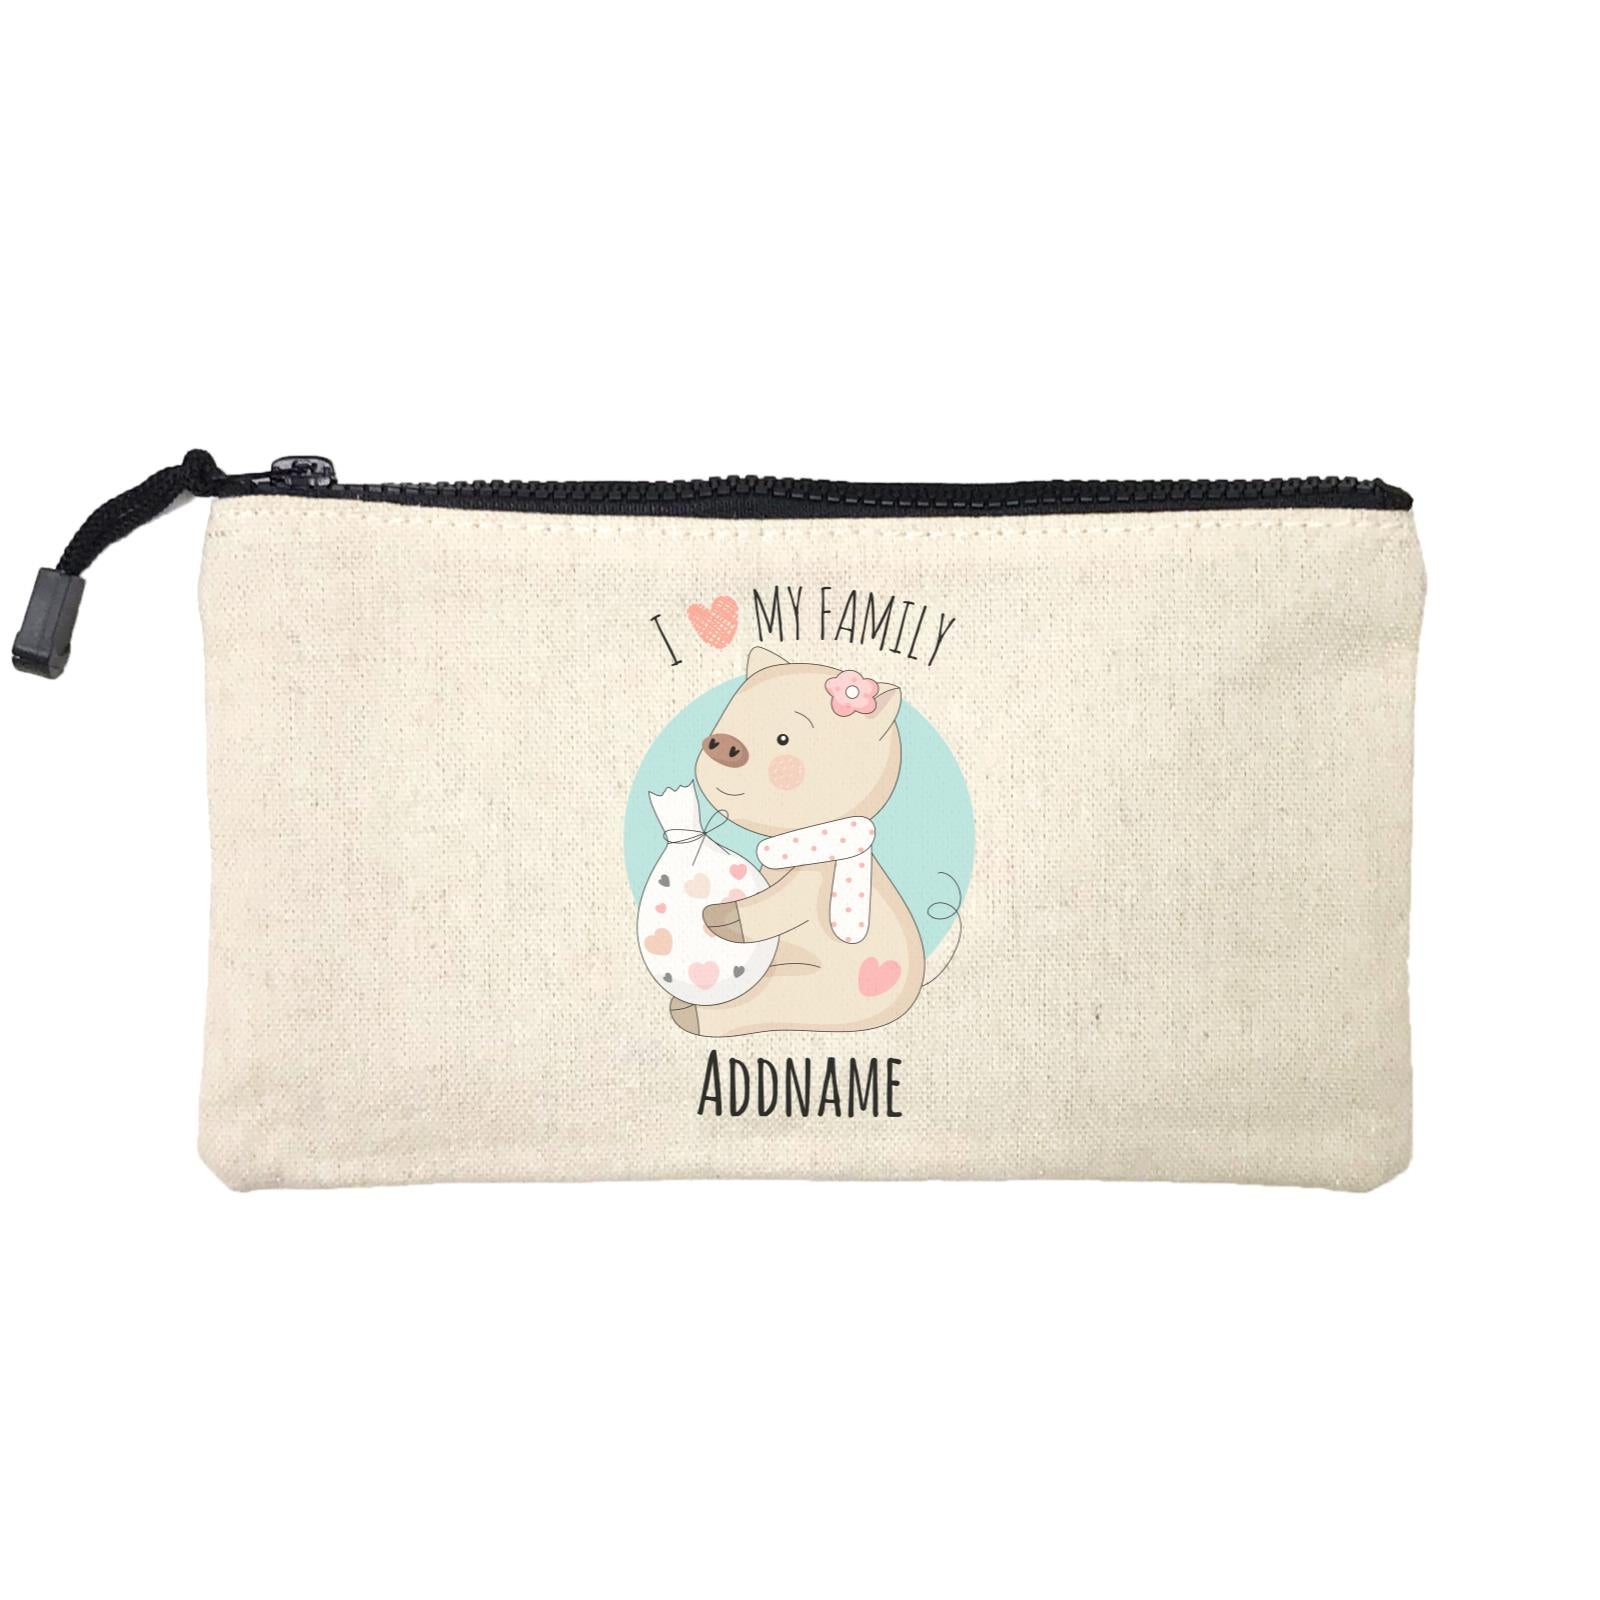 Sweet Animals Sketches Pig I Love My Family Addname Mini Accessories Stationery Pouch